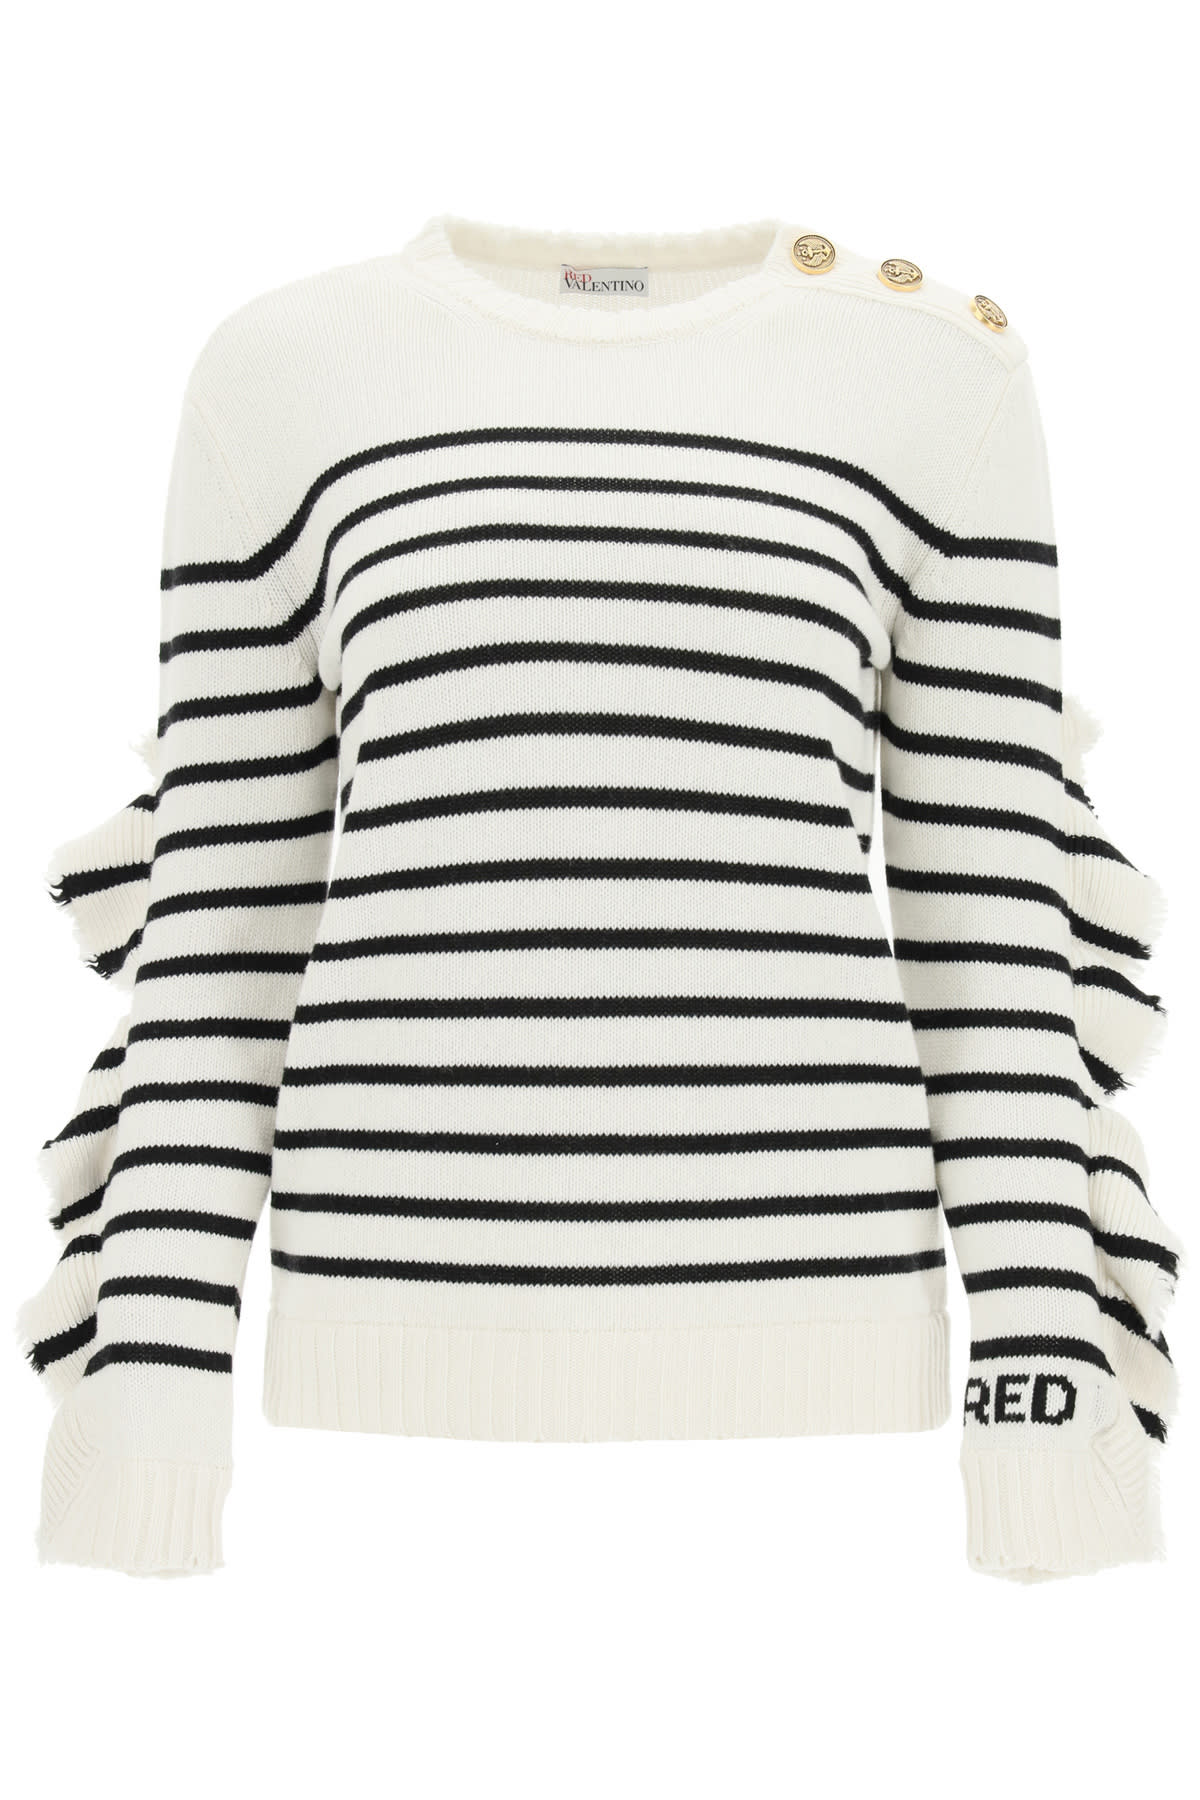 RED Valentino Striped Sweater With Ruffles